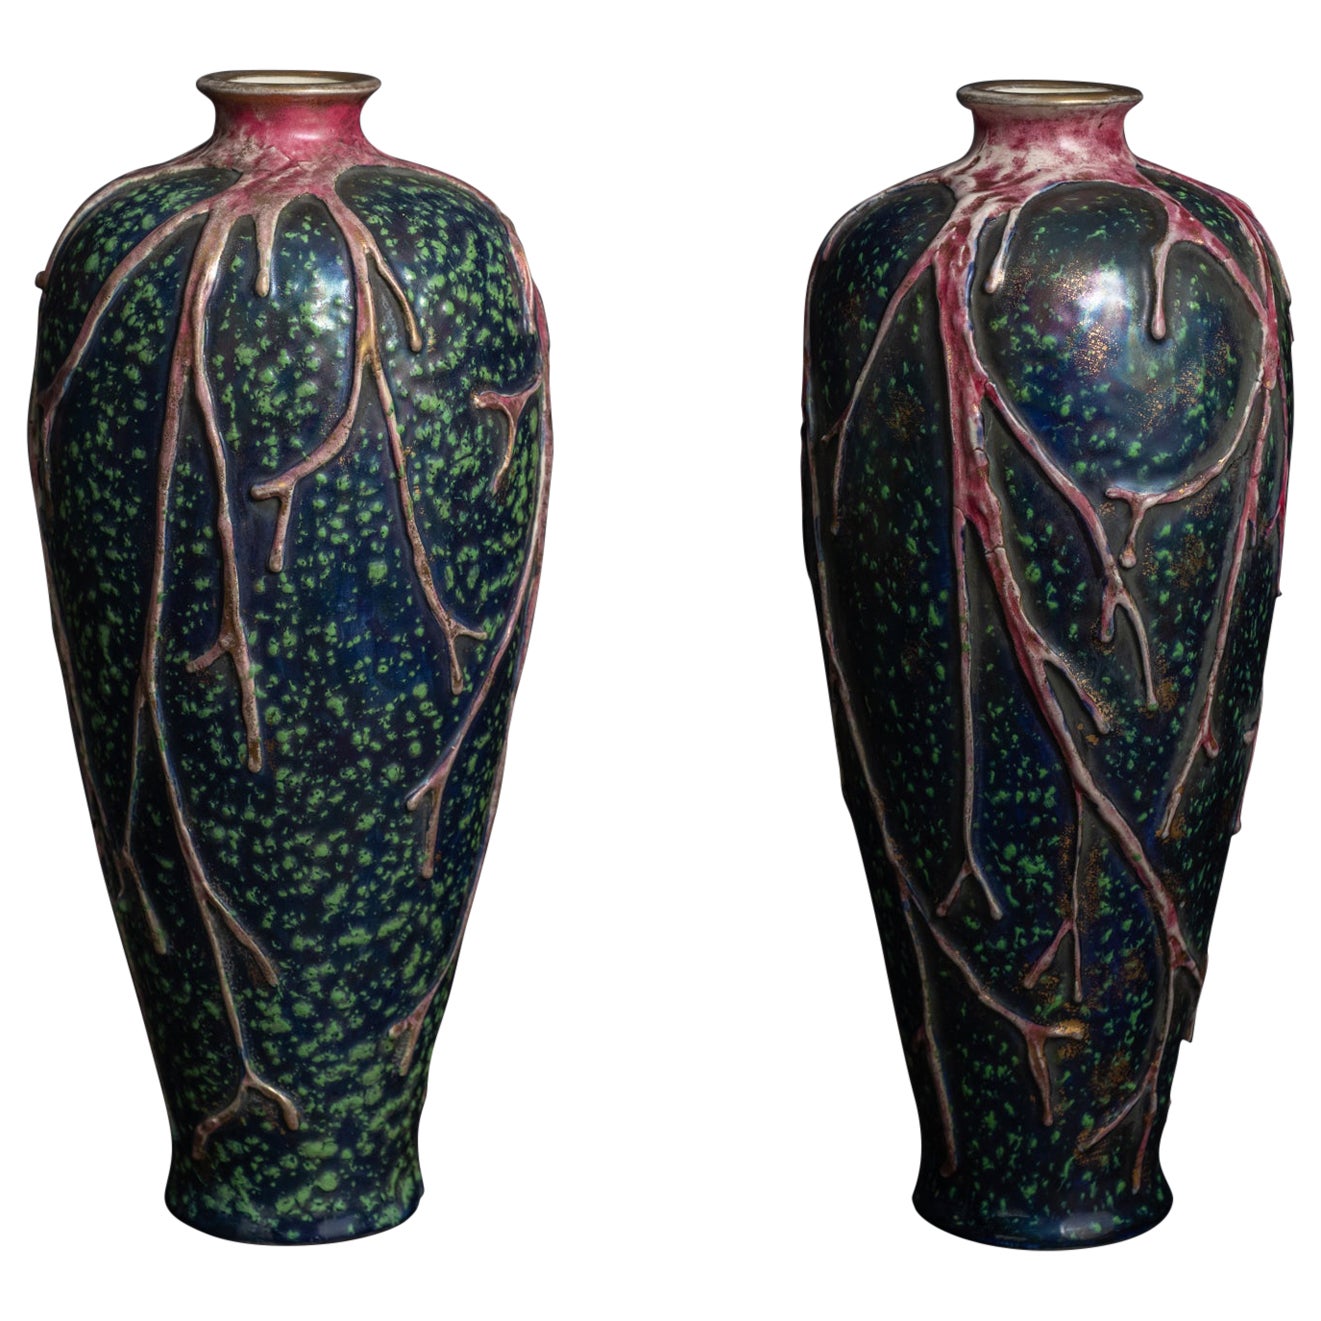 Pair of Art Nouveau Iridescent Vases with Stylized Seaweed Motif by RStK Amphora For Sale